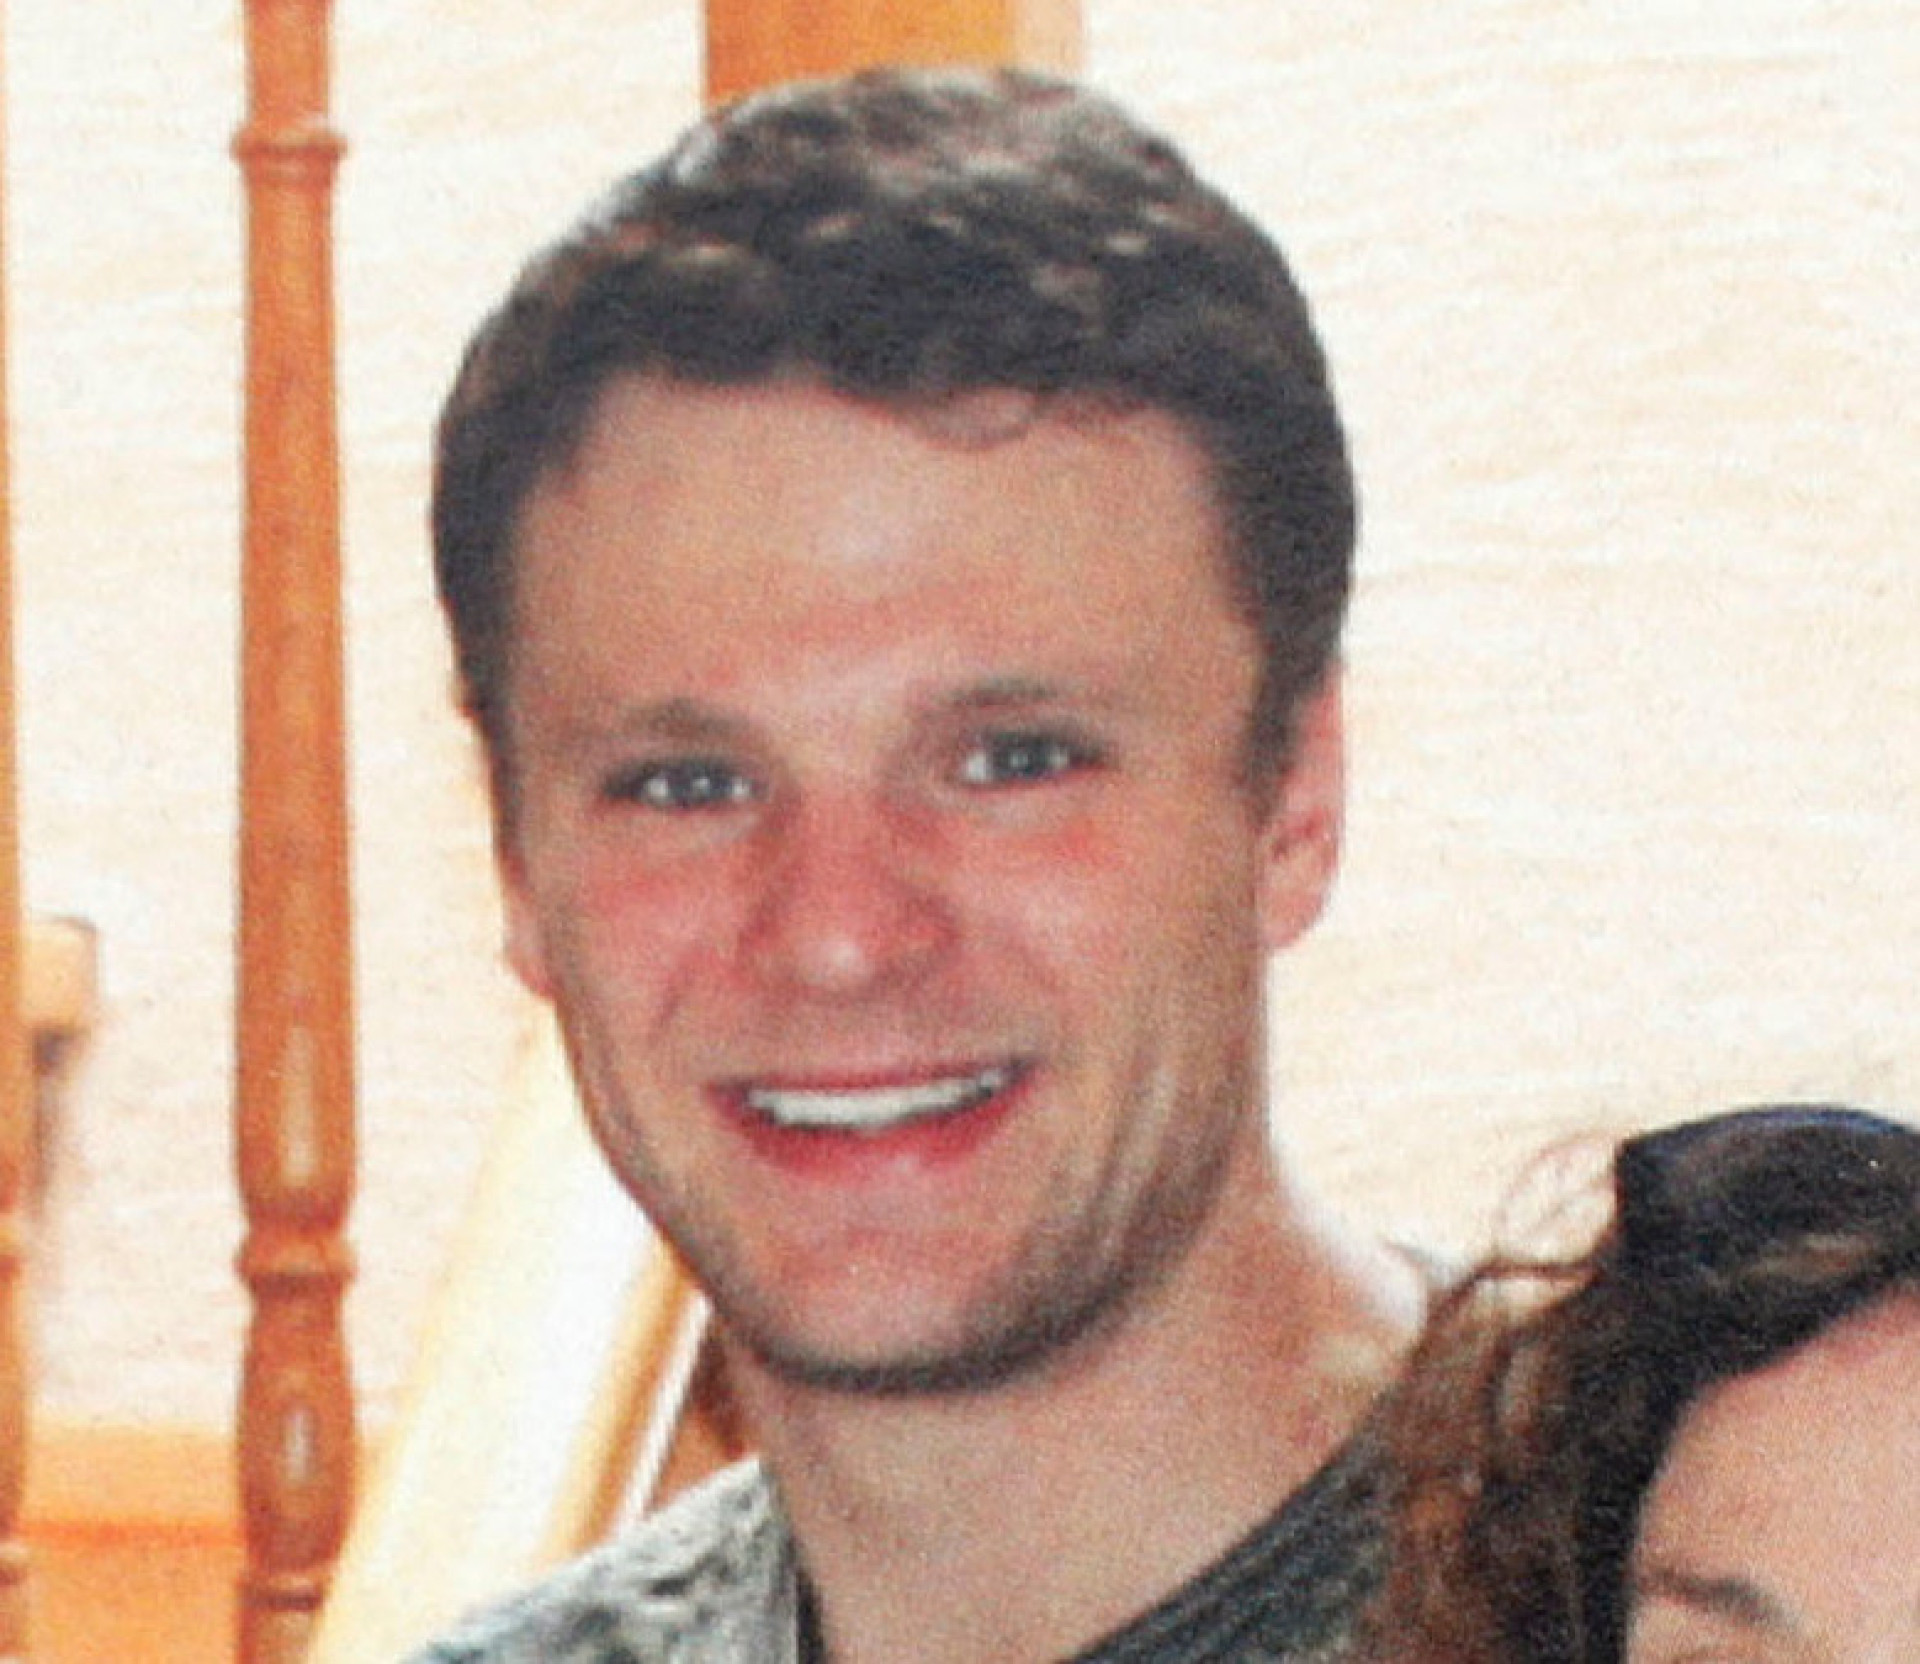 <p>College student Otto Warmbier was on a tour of North Korea when he was detained in January 2016 under charges of subversion. Warmbier allegedly tried to steal a political banner from his hotel.</p><p><a href="https://www.msn.com/en-us/community/channel/vid-7xx8mnucu55yw63we9va2gwr7uihbxwc68fxqp25x6tg4ftibpra?cvid=94631541bc0f4f89bfd59158d696ad7e">Follow us and access great exclusive content every day</a></p>